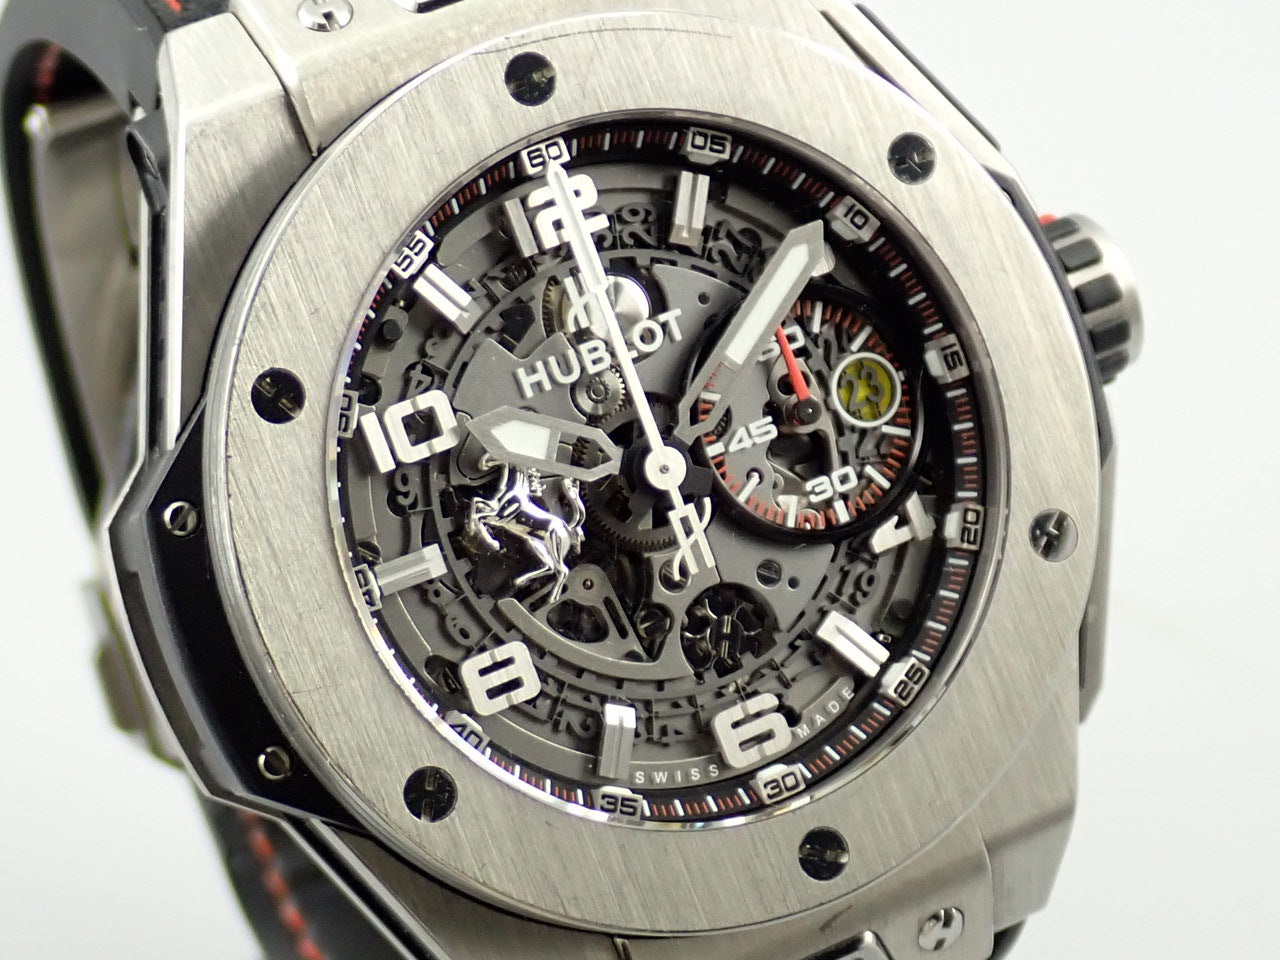 Hublot Big Bang Ferrari Titanium Limited to 1000 pieces worldwide &lt;Warranty box and other details&gt;